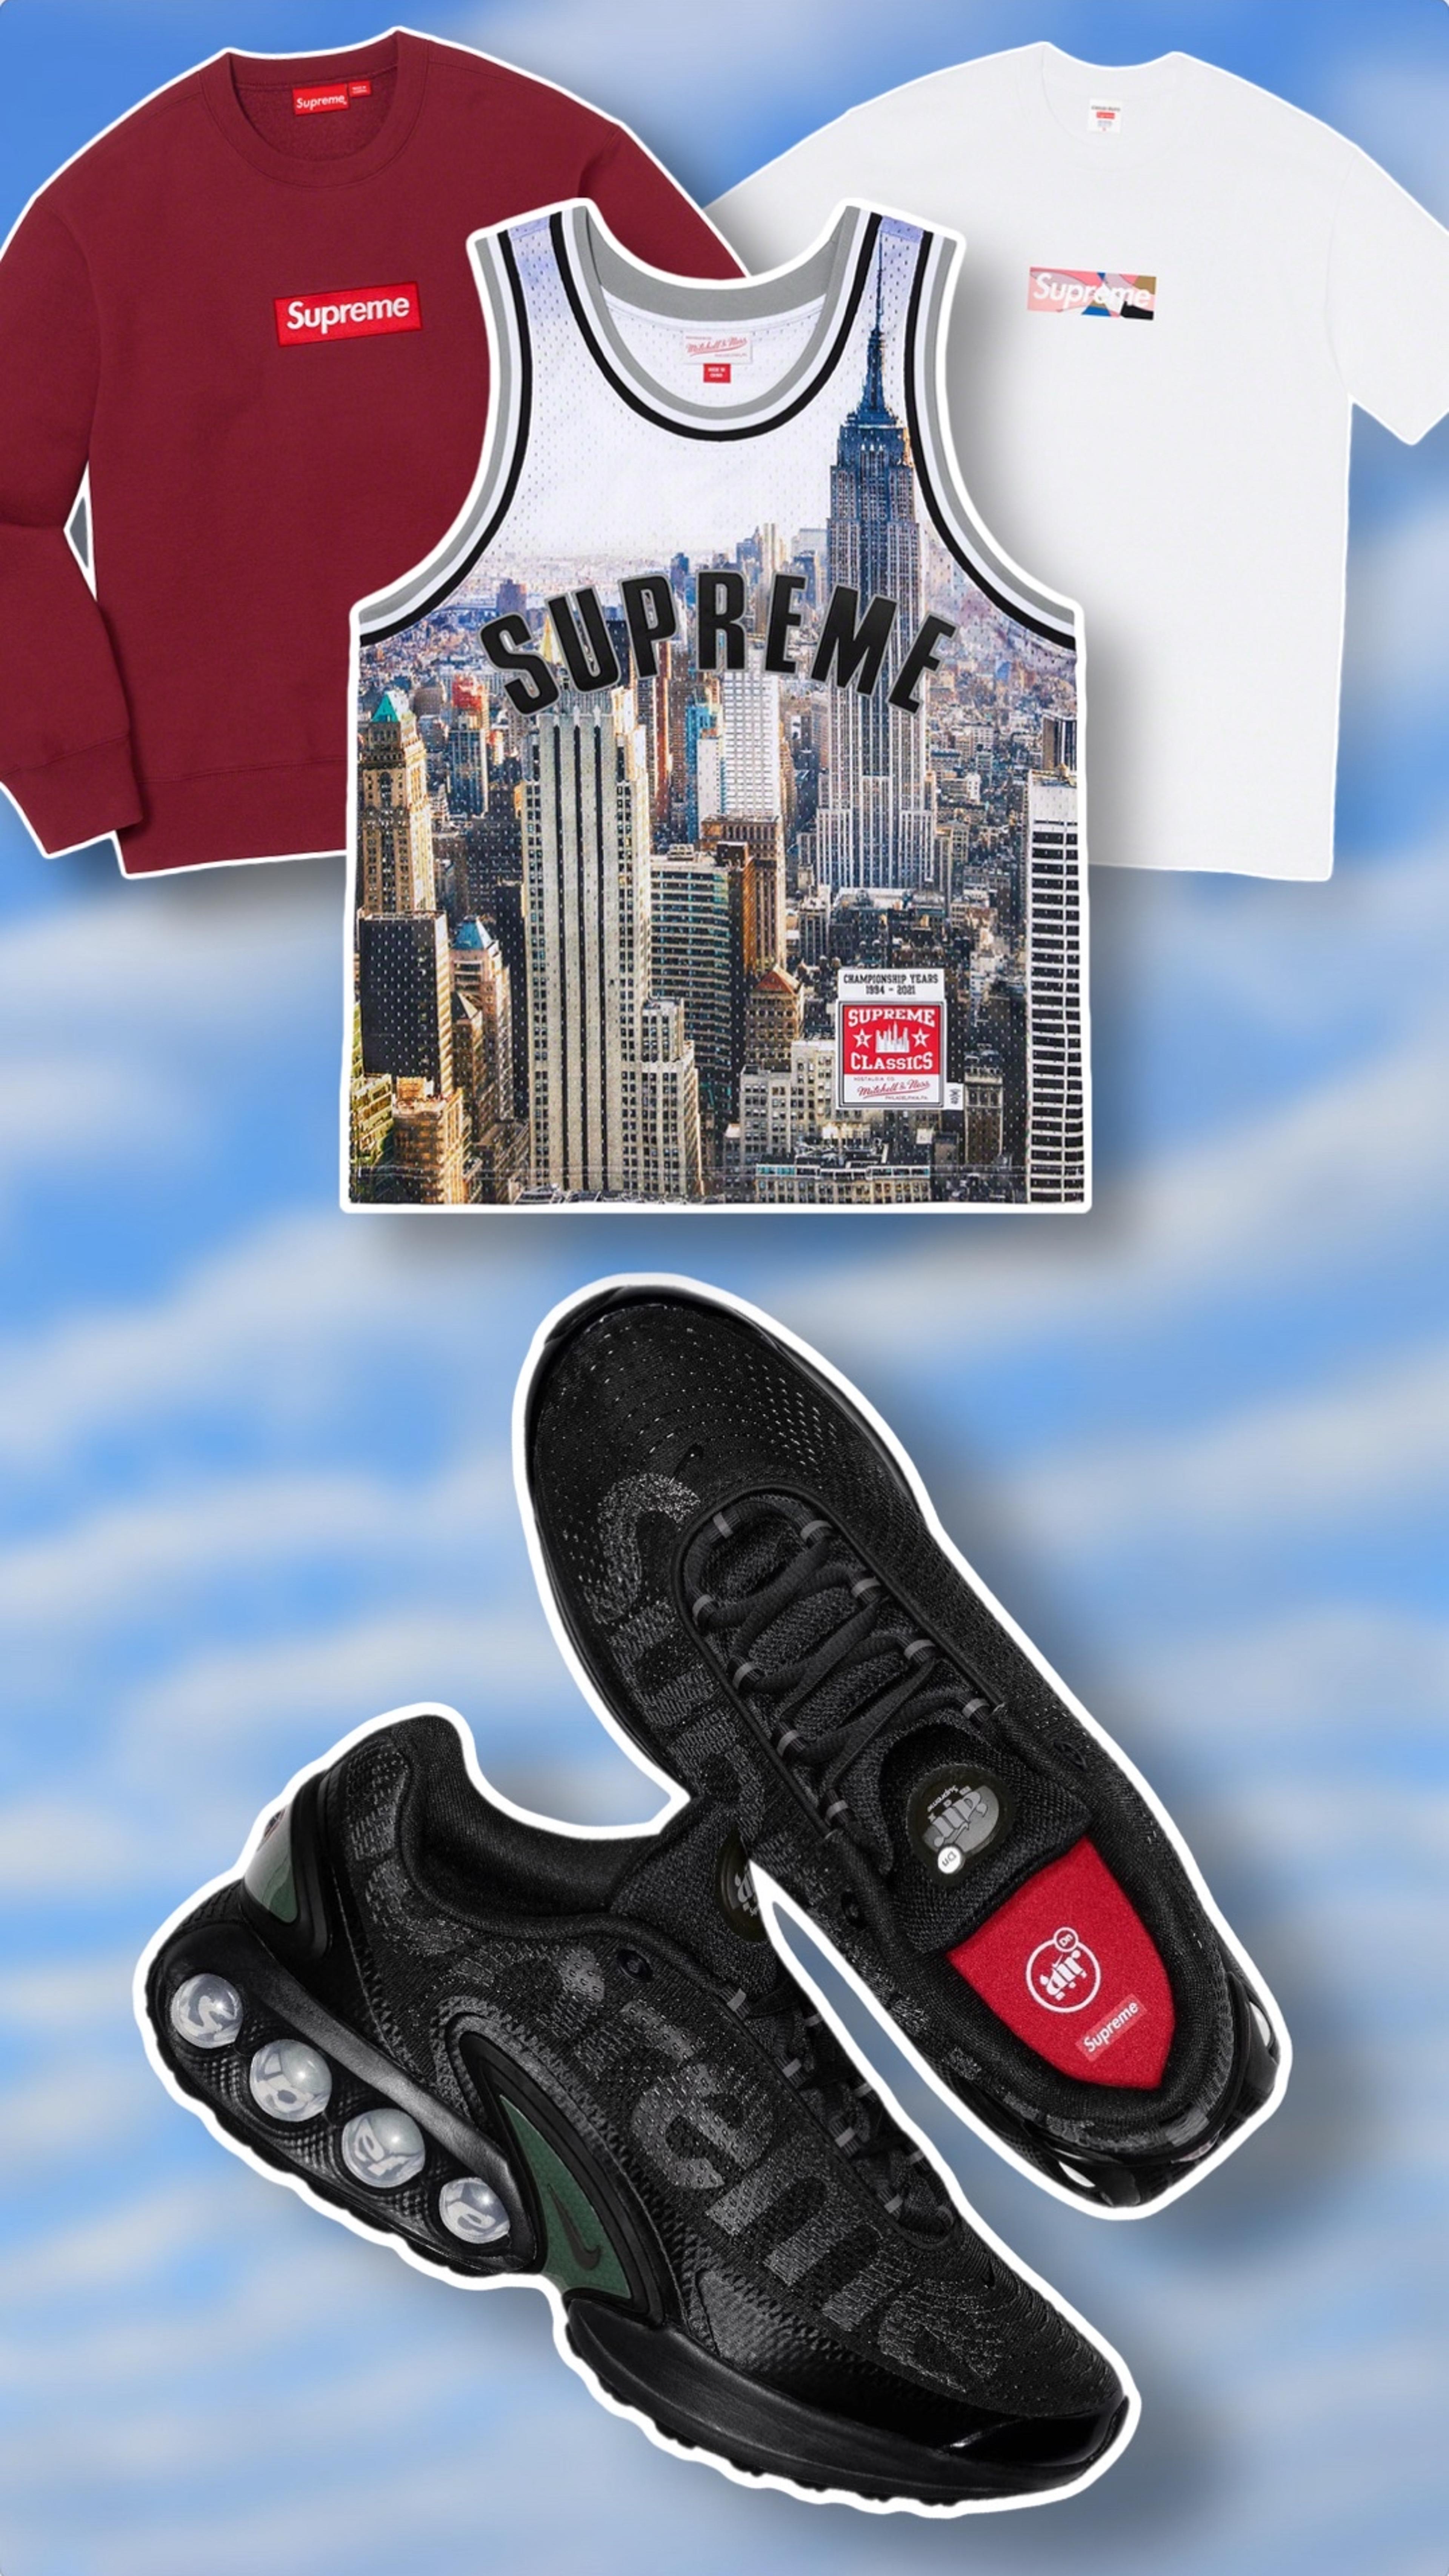 Preview image for the show titled "NEED SUPREME ?" at Today @ 11:00 PM